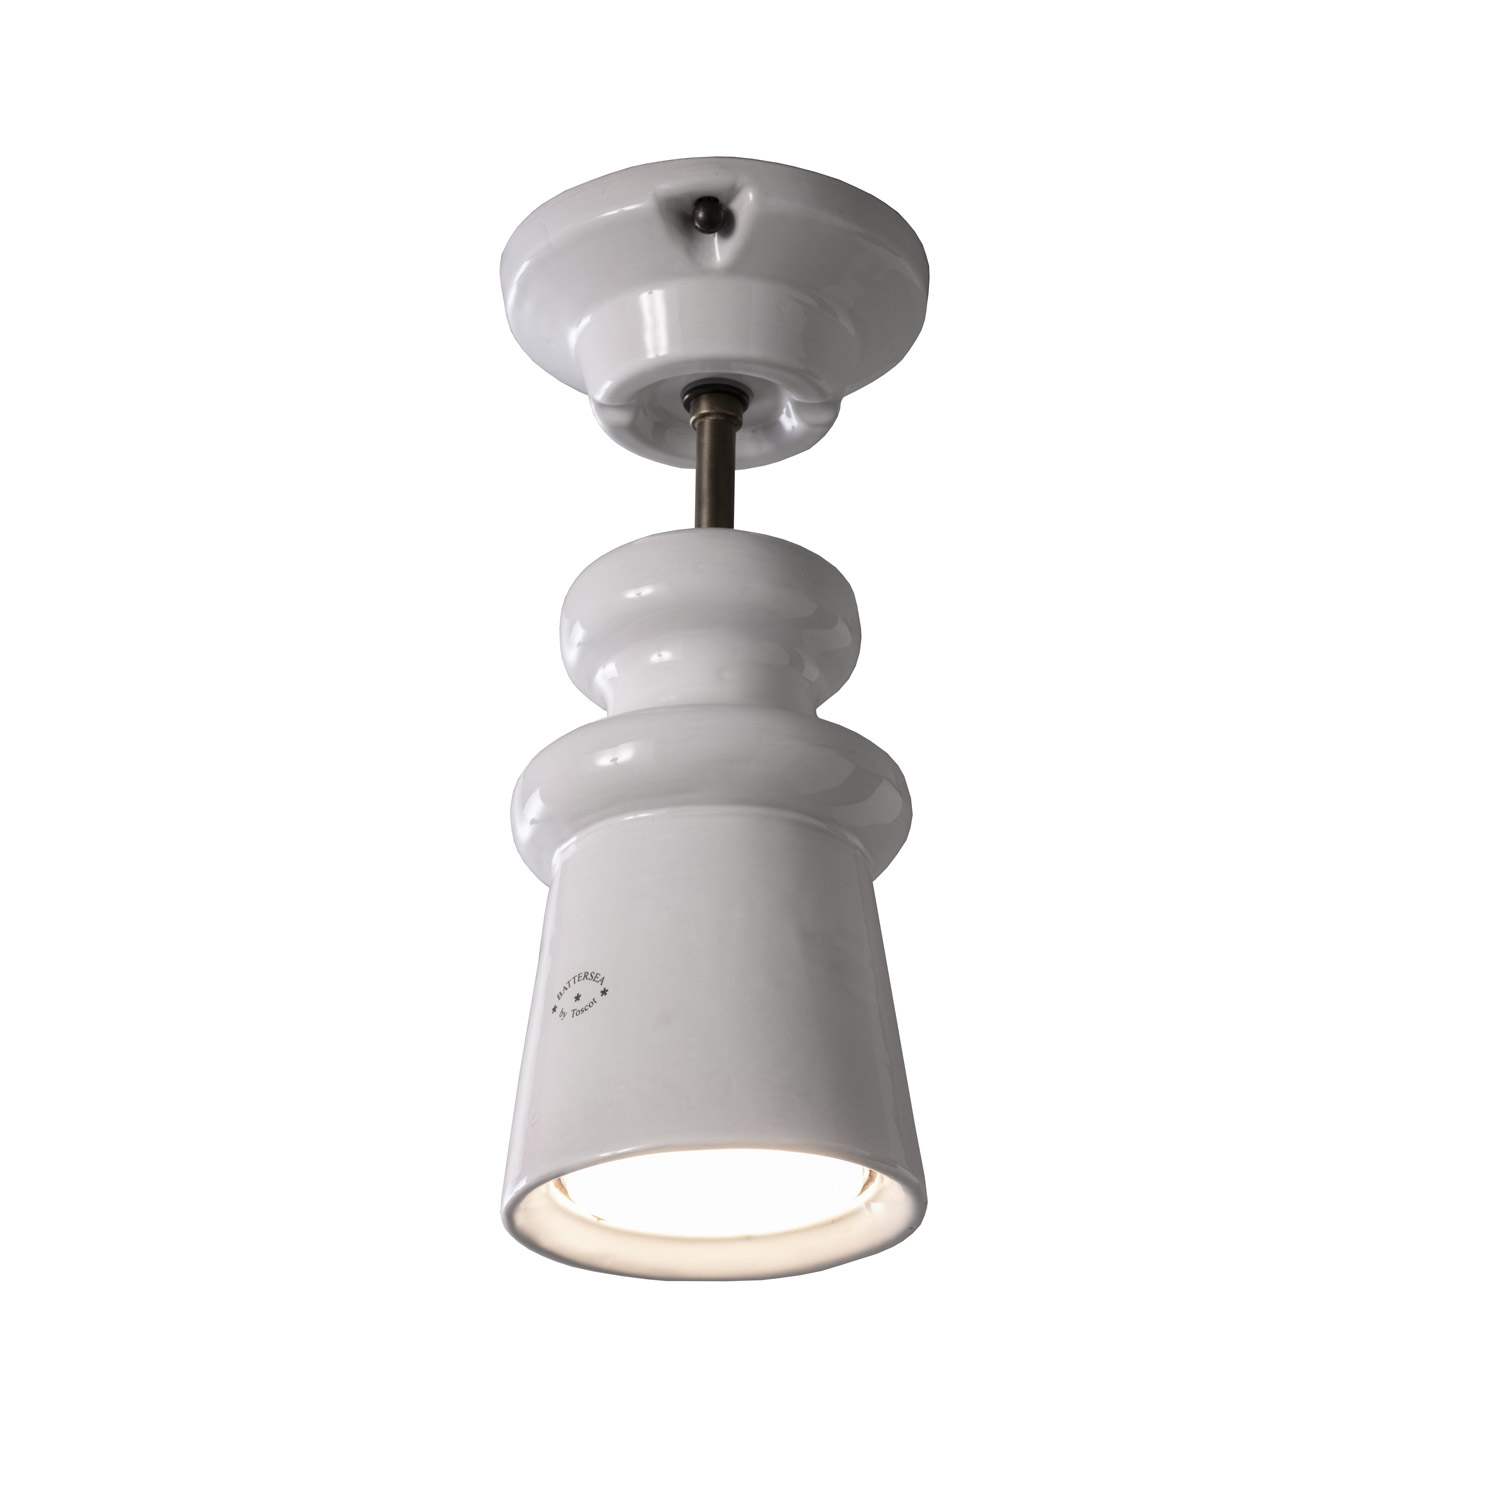 Battersea 978 outdoor ceiling lamp by Toscot